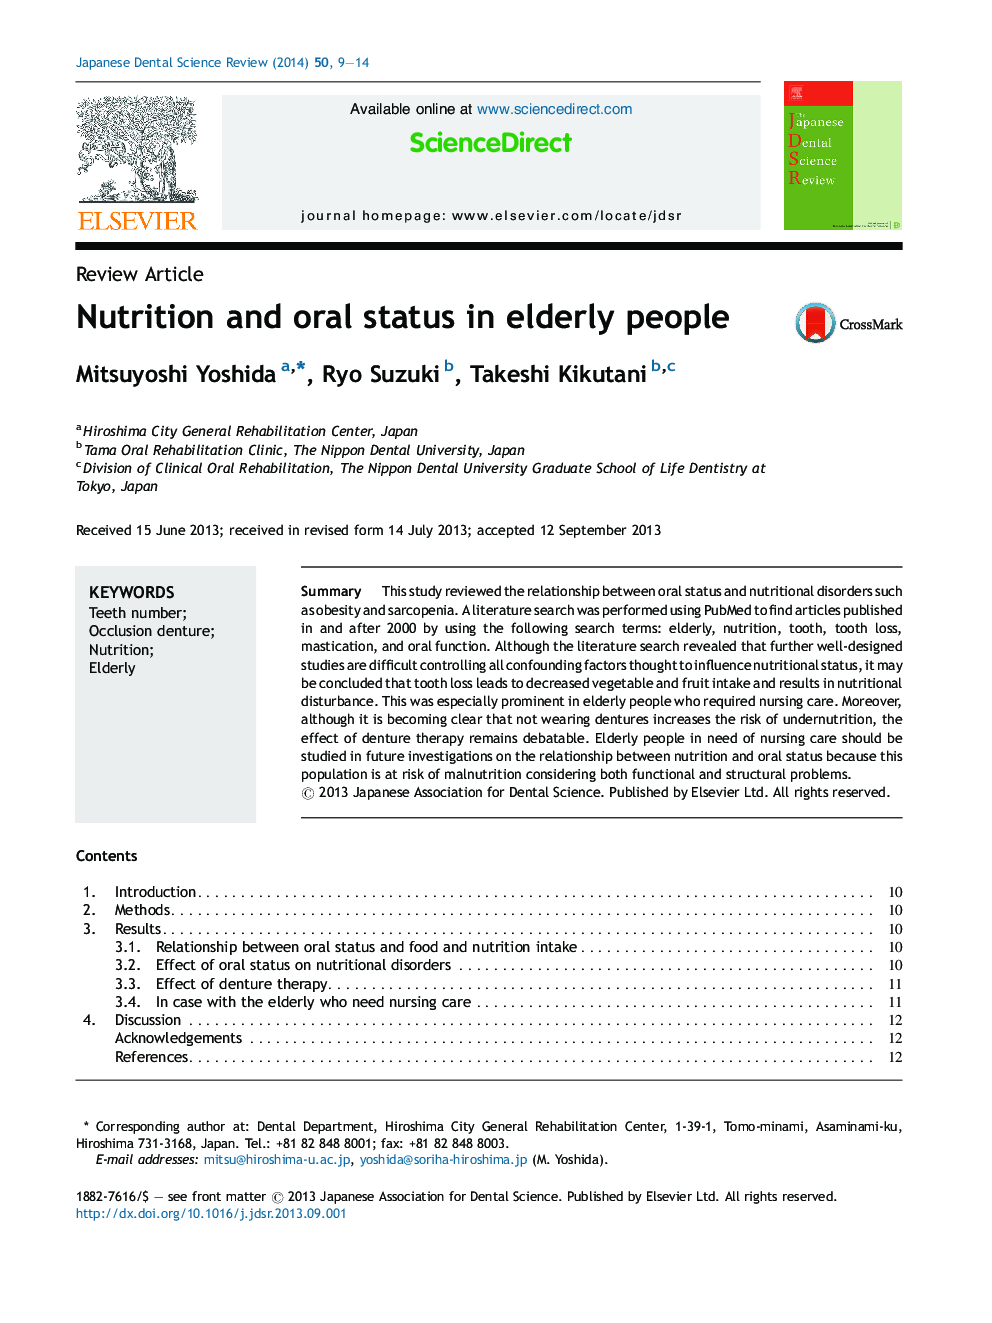 Nutrition and oral status in elderly people